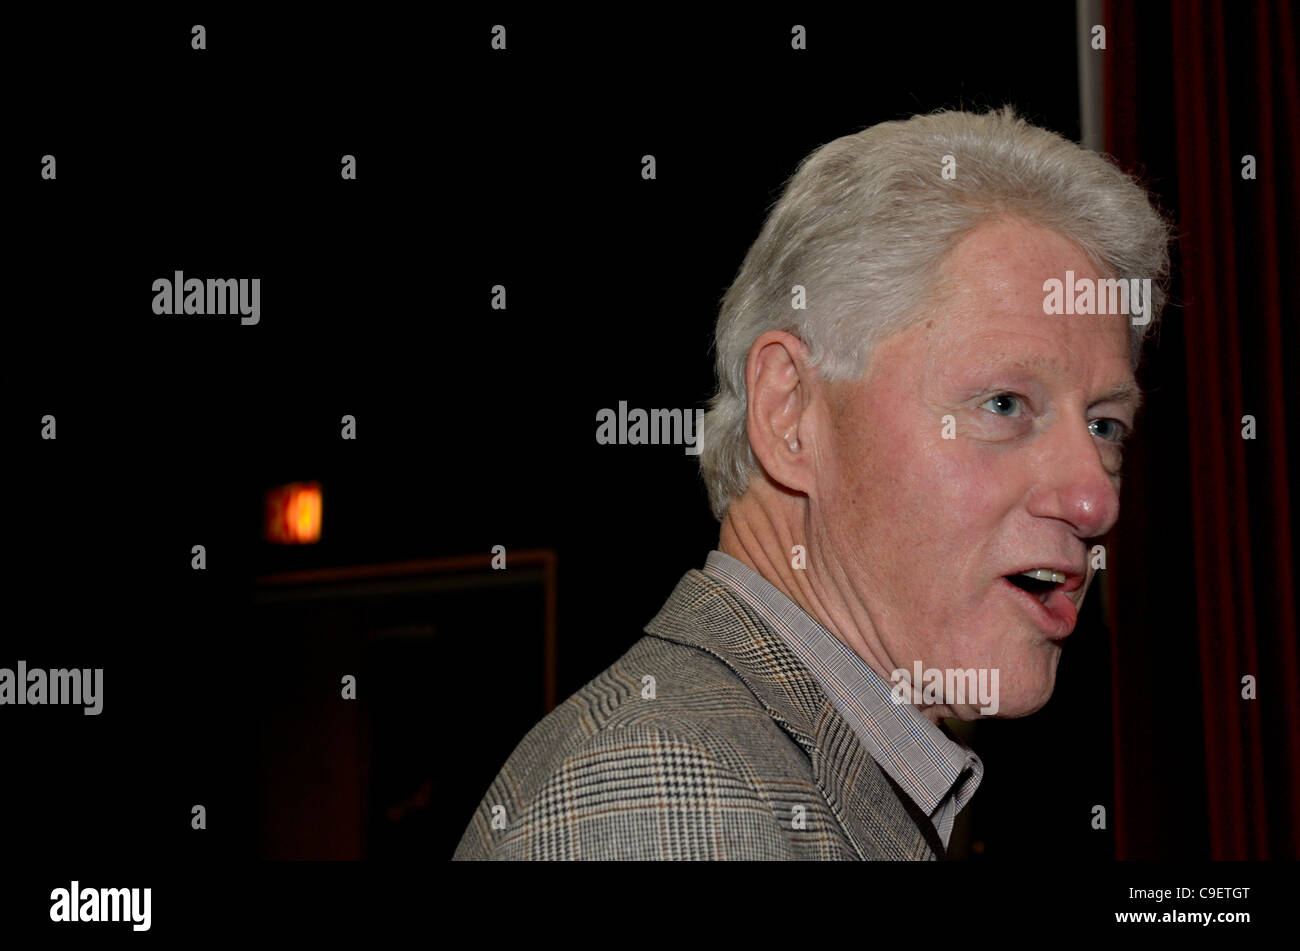 Portrait of President Bill Clinton taken as he speaks to the press during his book signing at the Chappaqua Library in his hometown of Chappaqua, New York on December 9, 2011. More than 500 people attended the book signing. Stock Photo